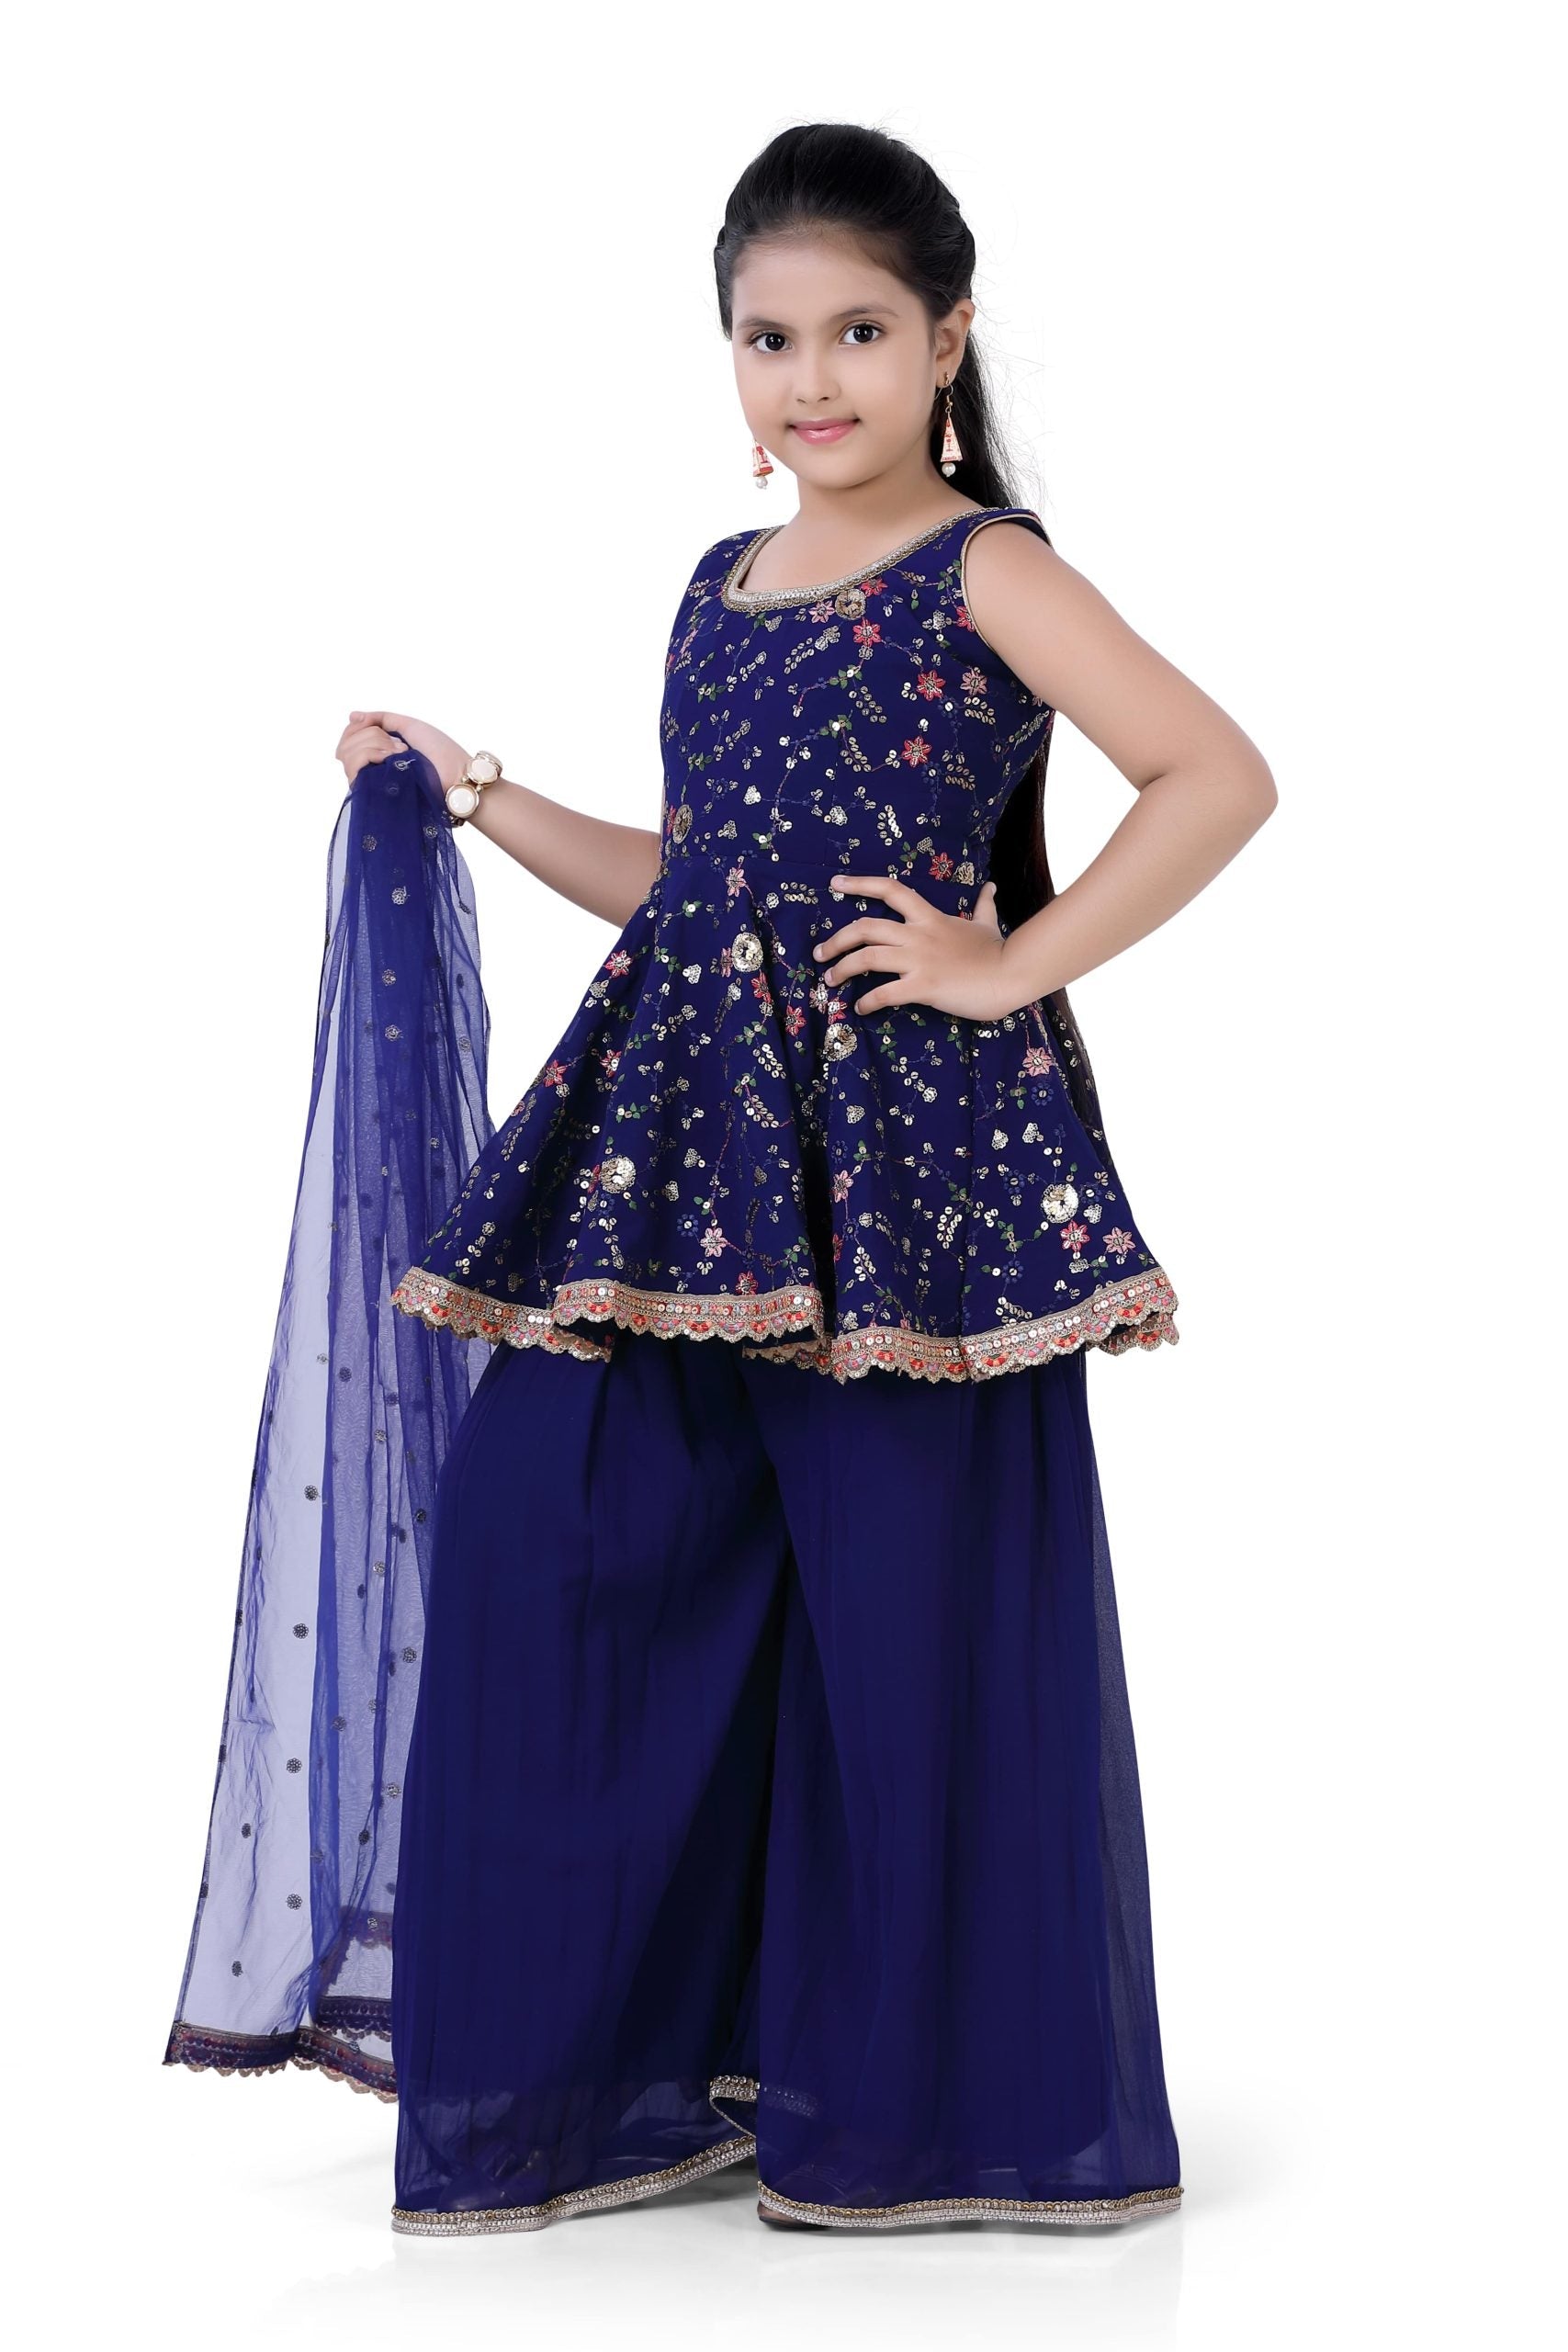 Girls Short Top & Palazzo With Dupatta in Navy Blue Color